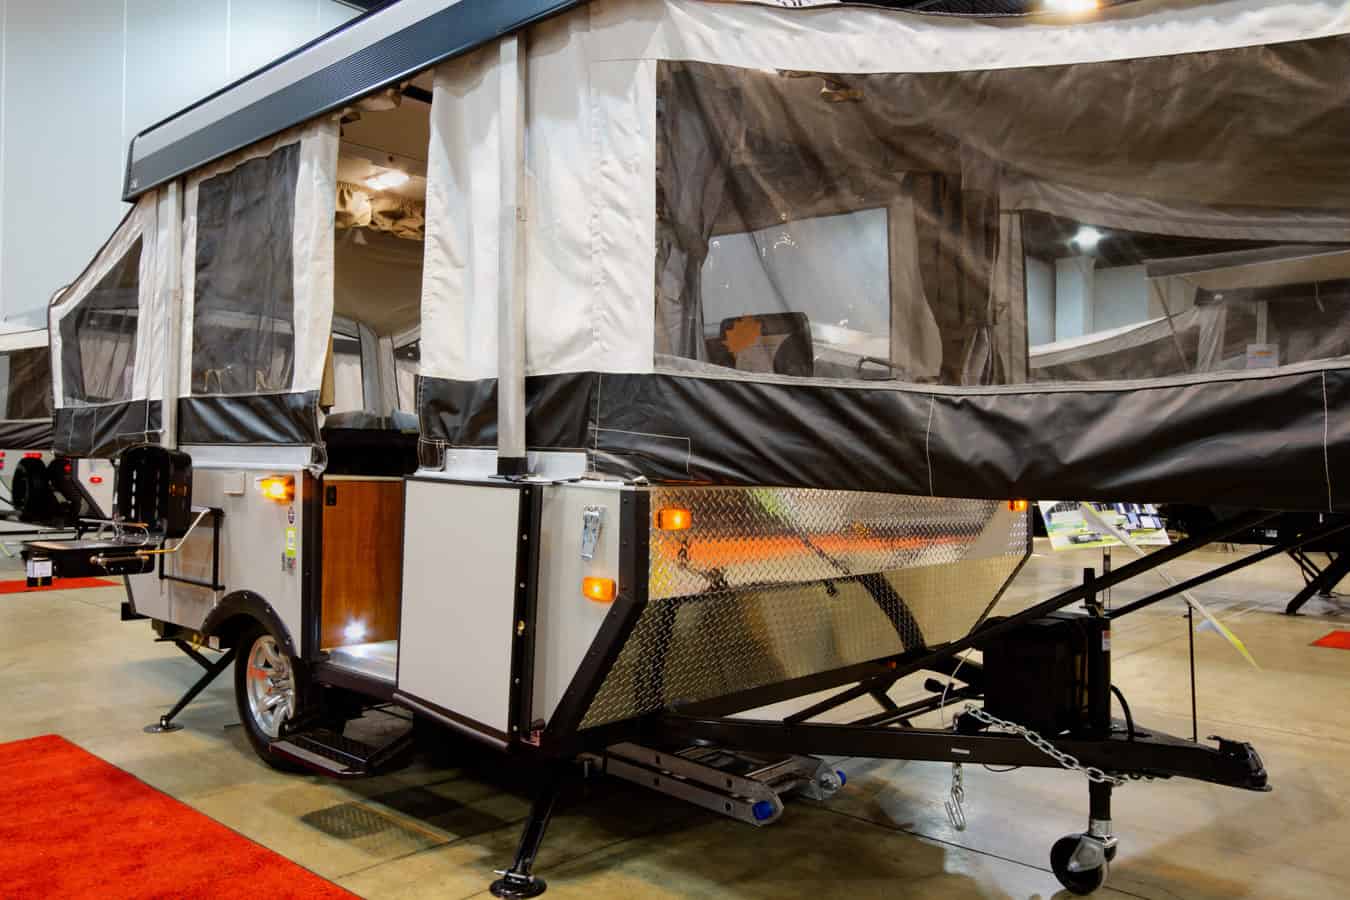 Ing A Pop Up Tent Trailer Camper, Do Pop Up Tents Have Bathrooms